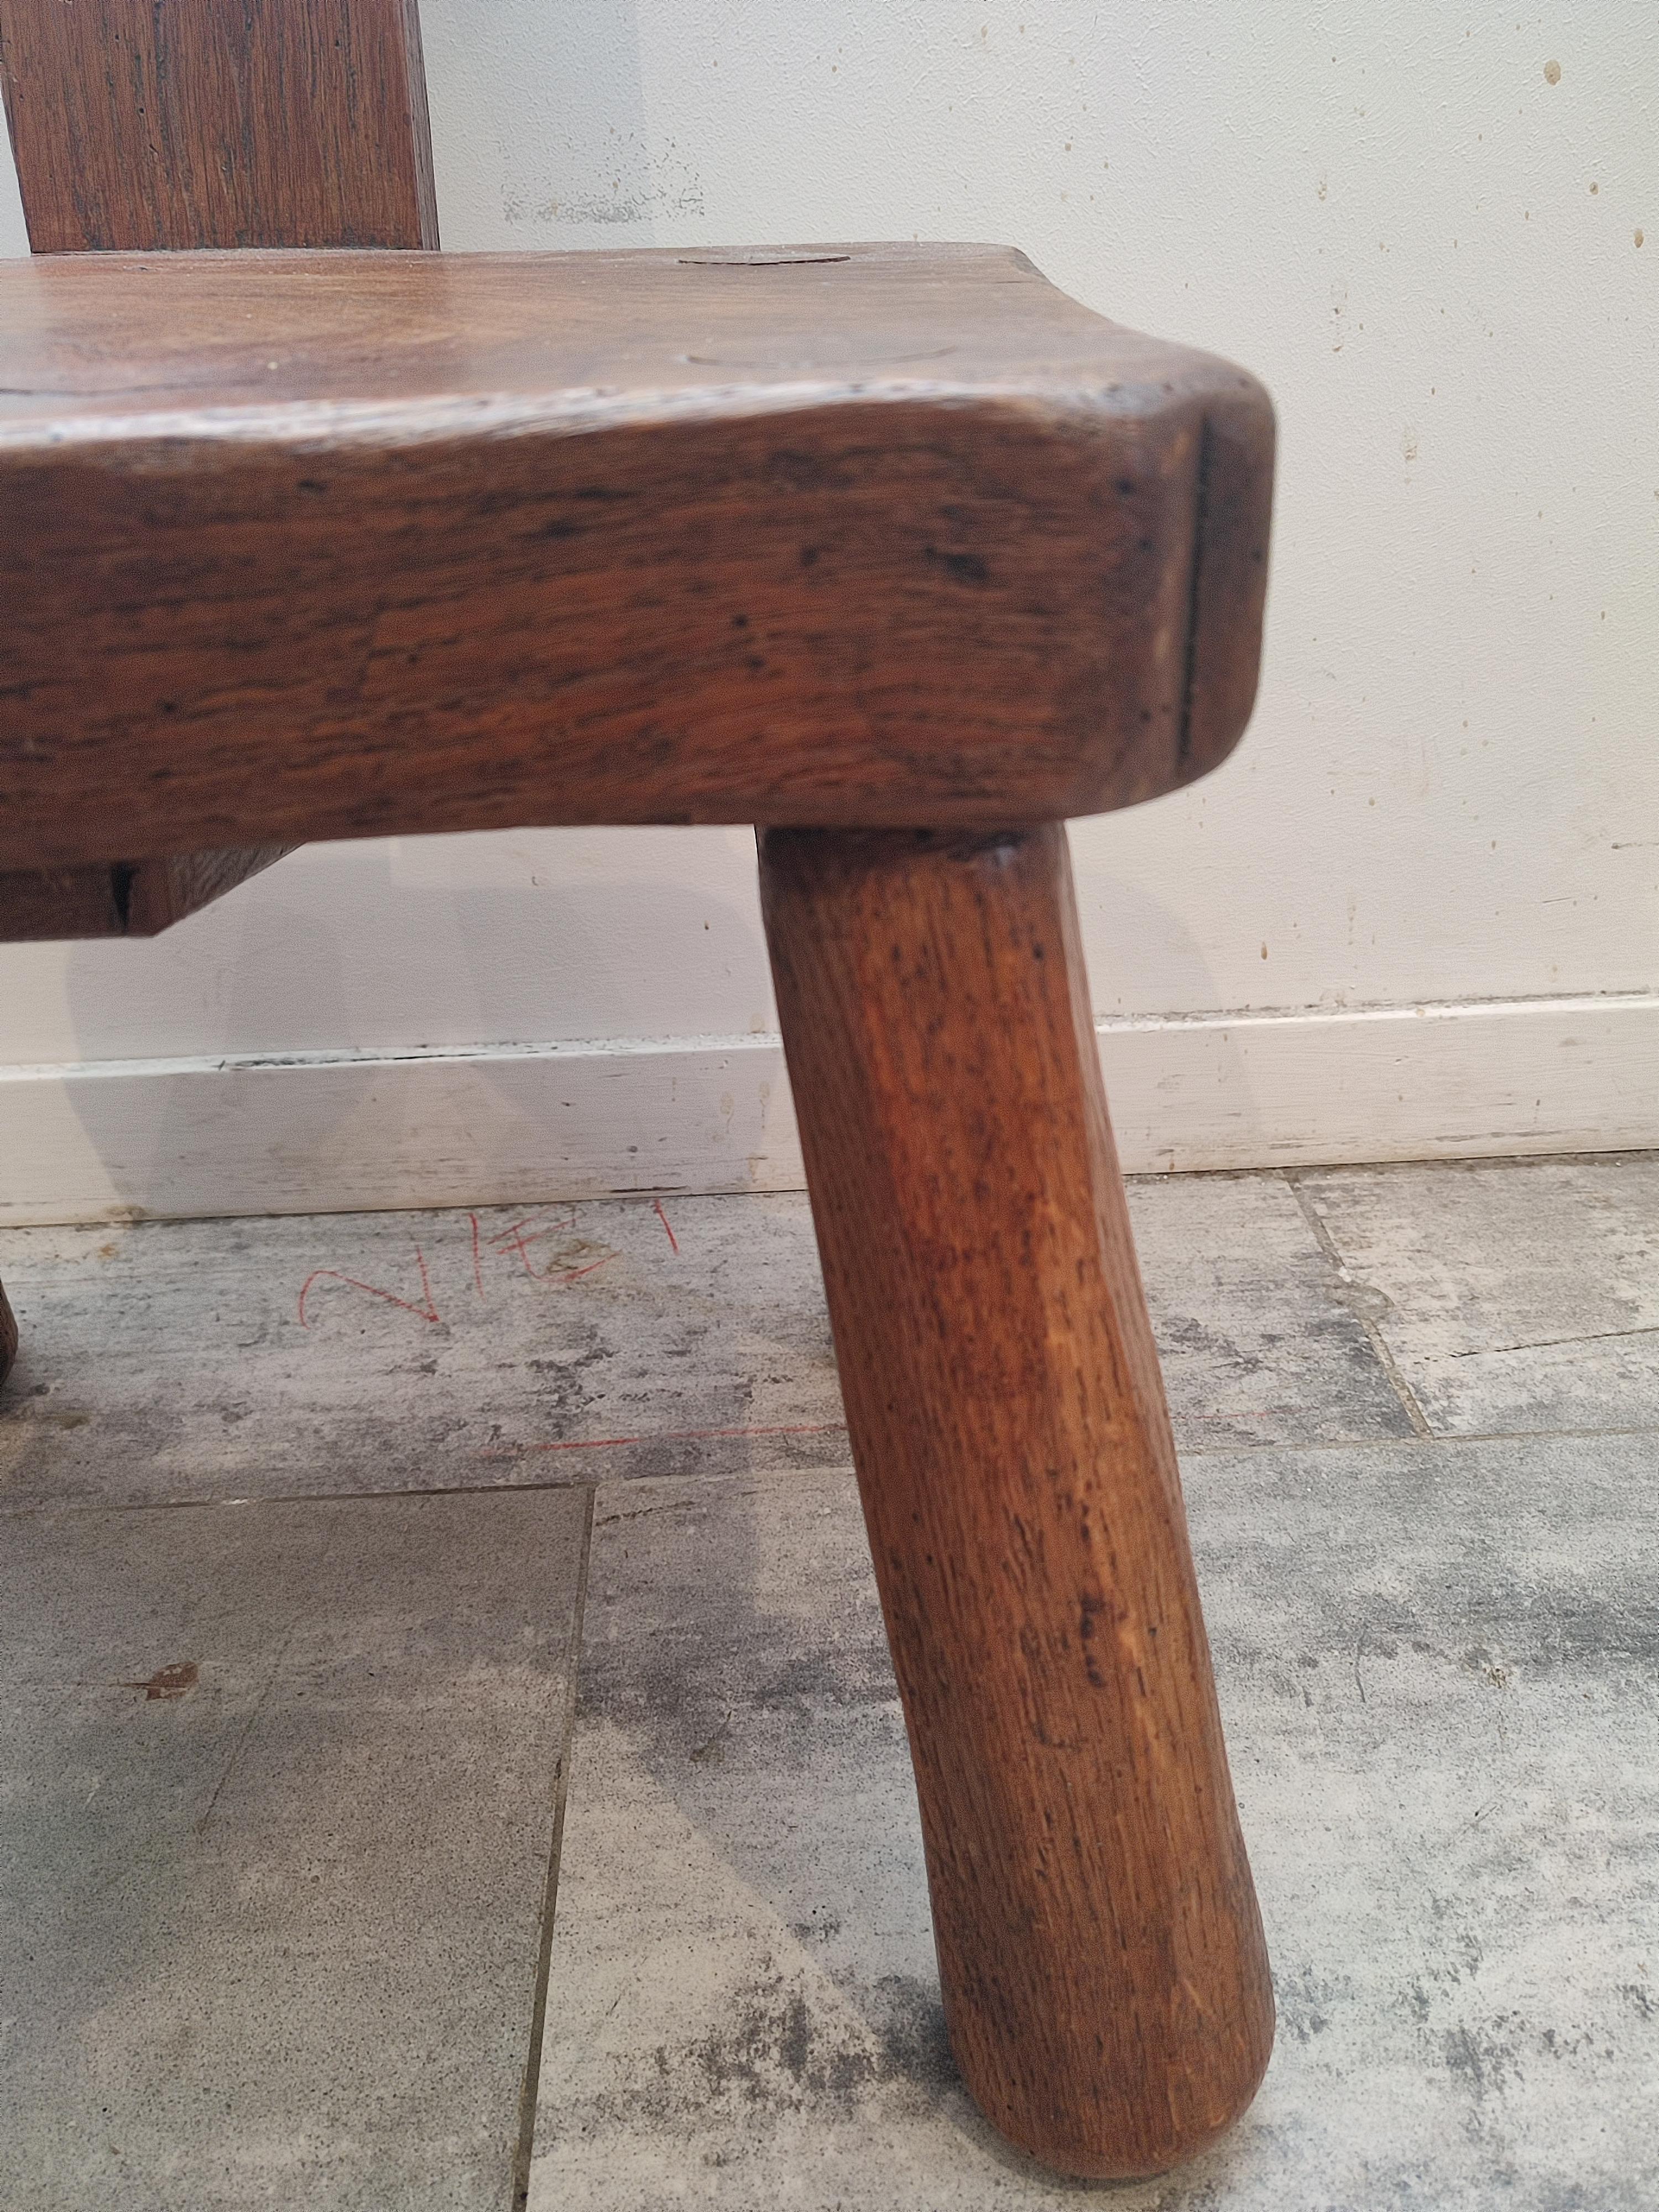 Rough Brutalist Wooden Chair from France, 1950s For Sale 1